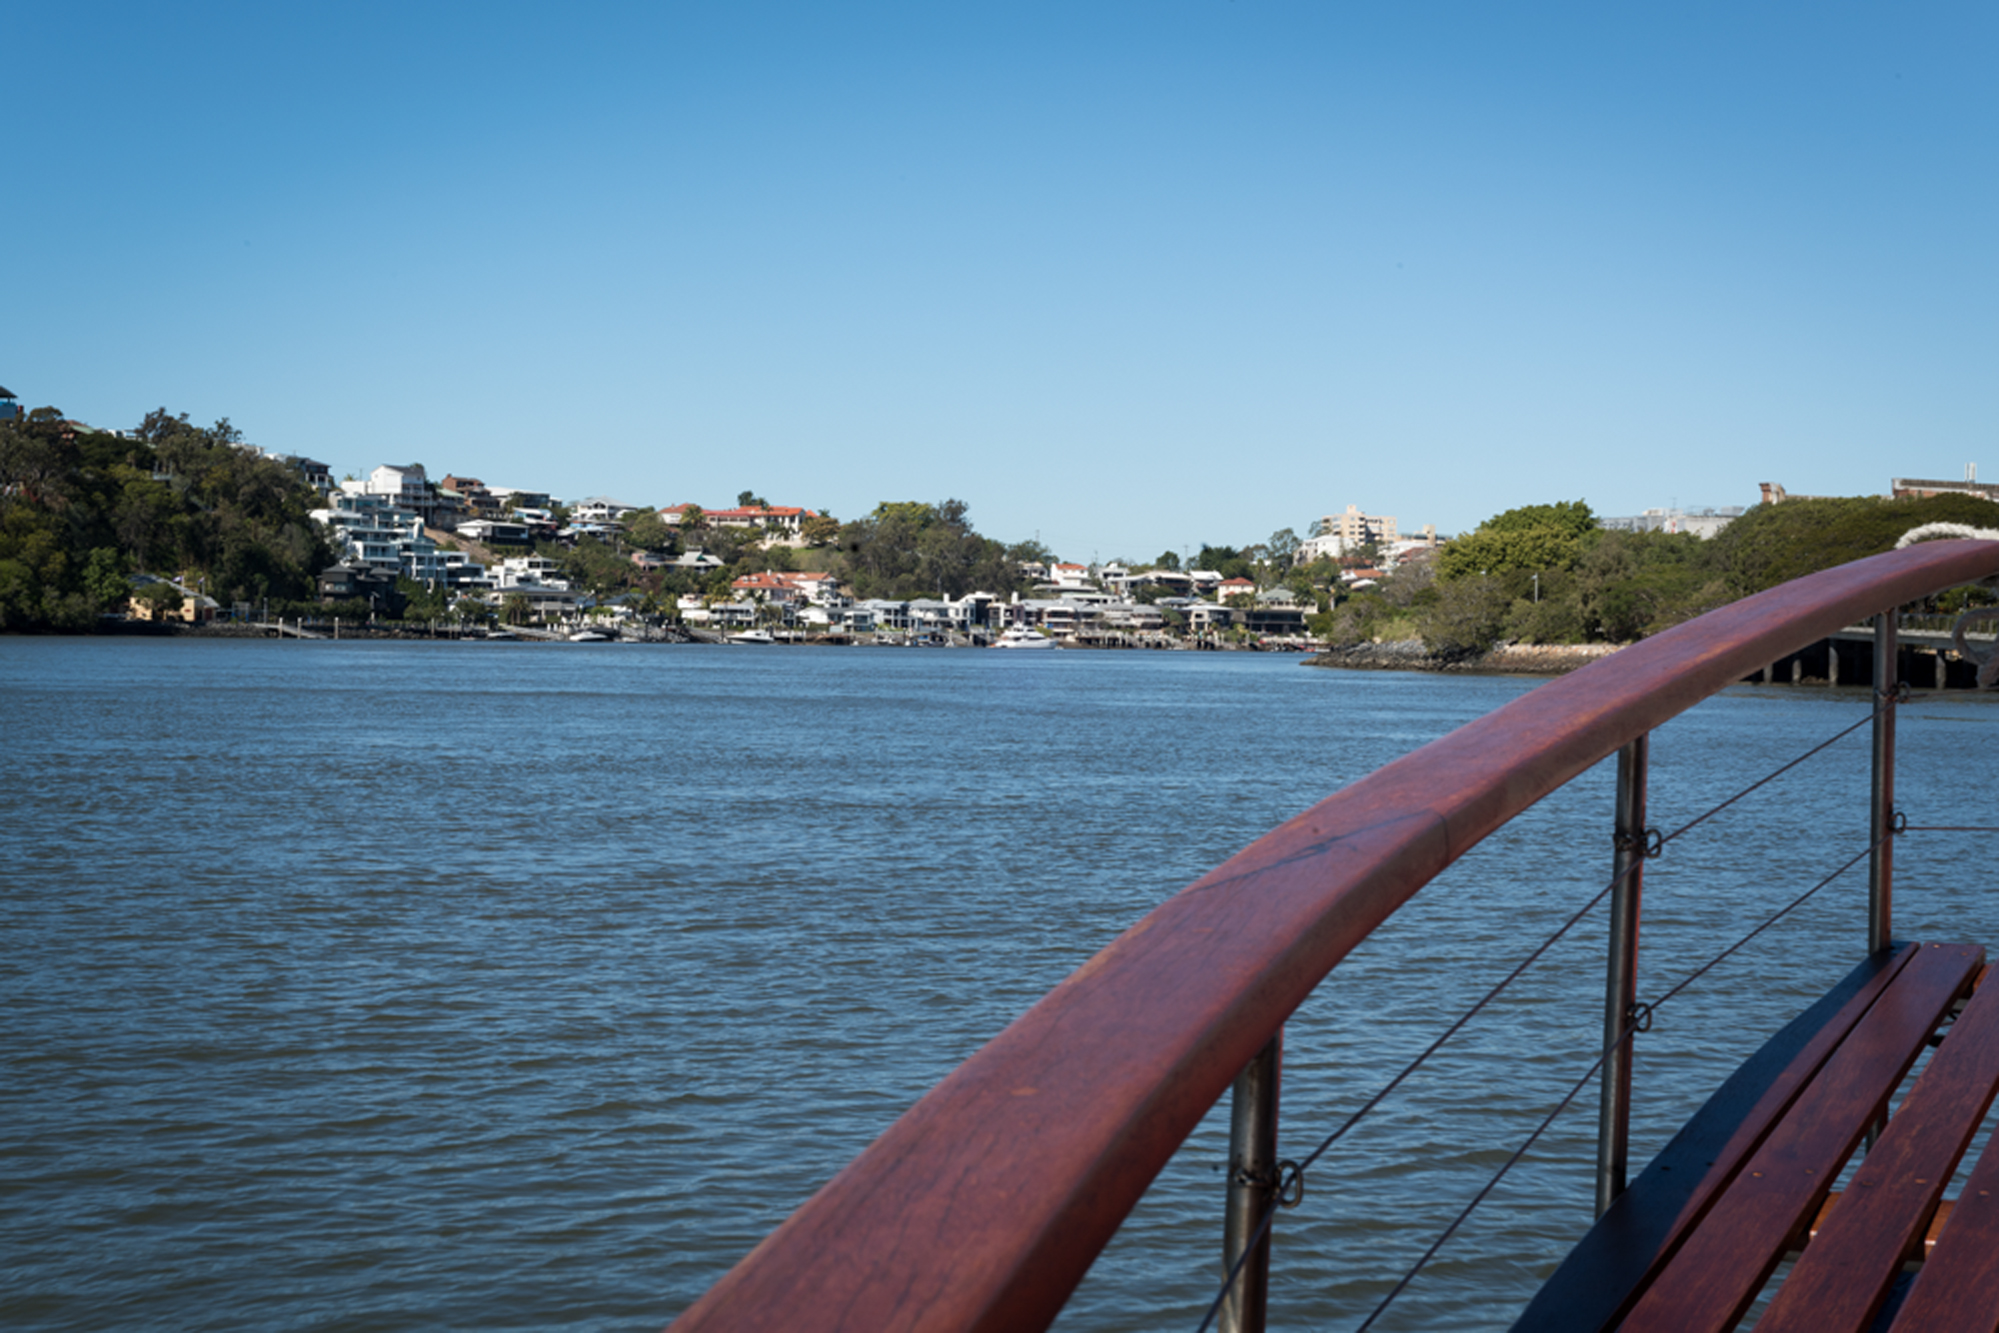 Brisbane River Sightseeing Cruise - Midday